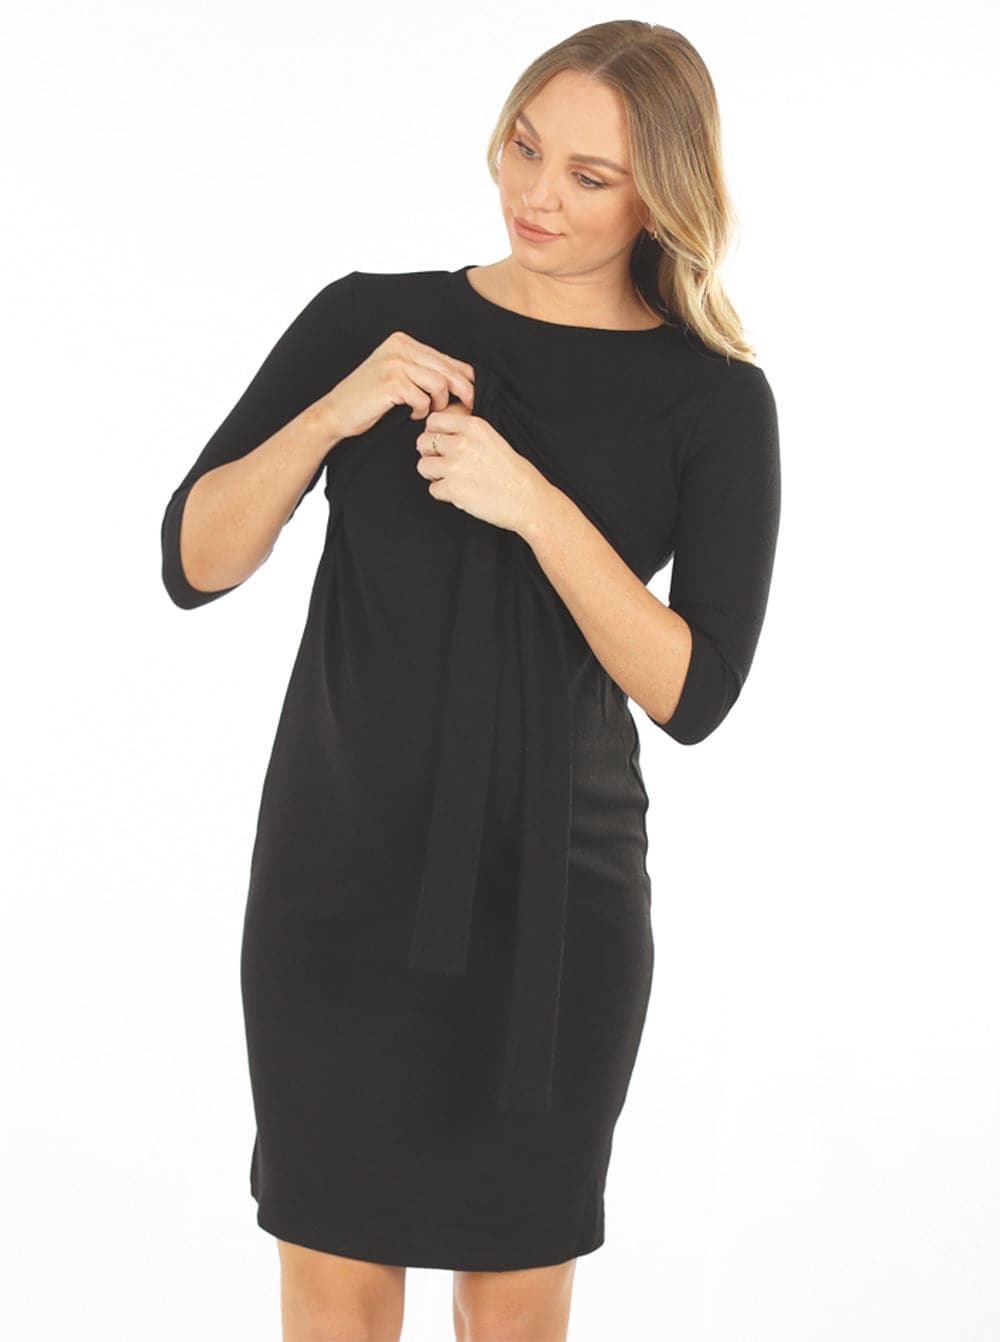 Maternity and Nursing Tie Knot Dress in Black from Angel Maternity Maternity Showing Breastfeeding Access